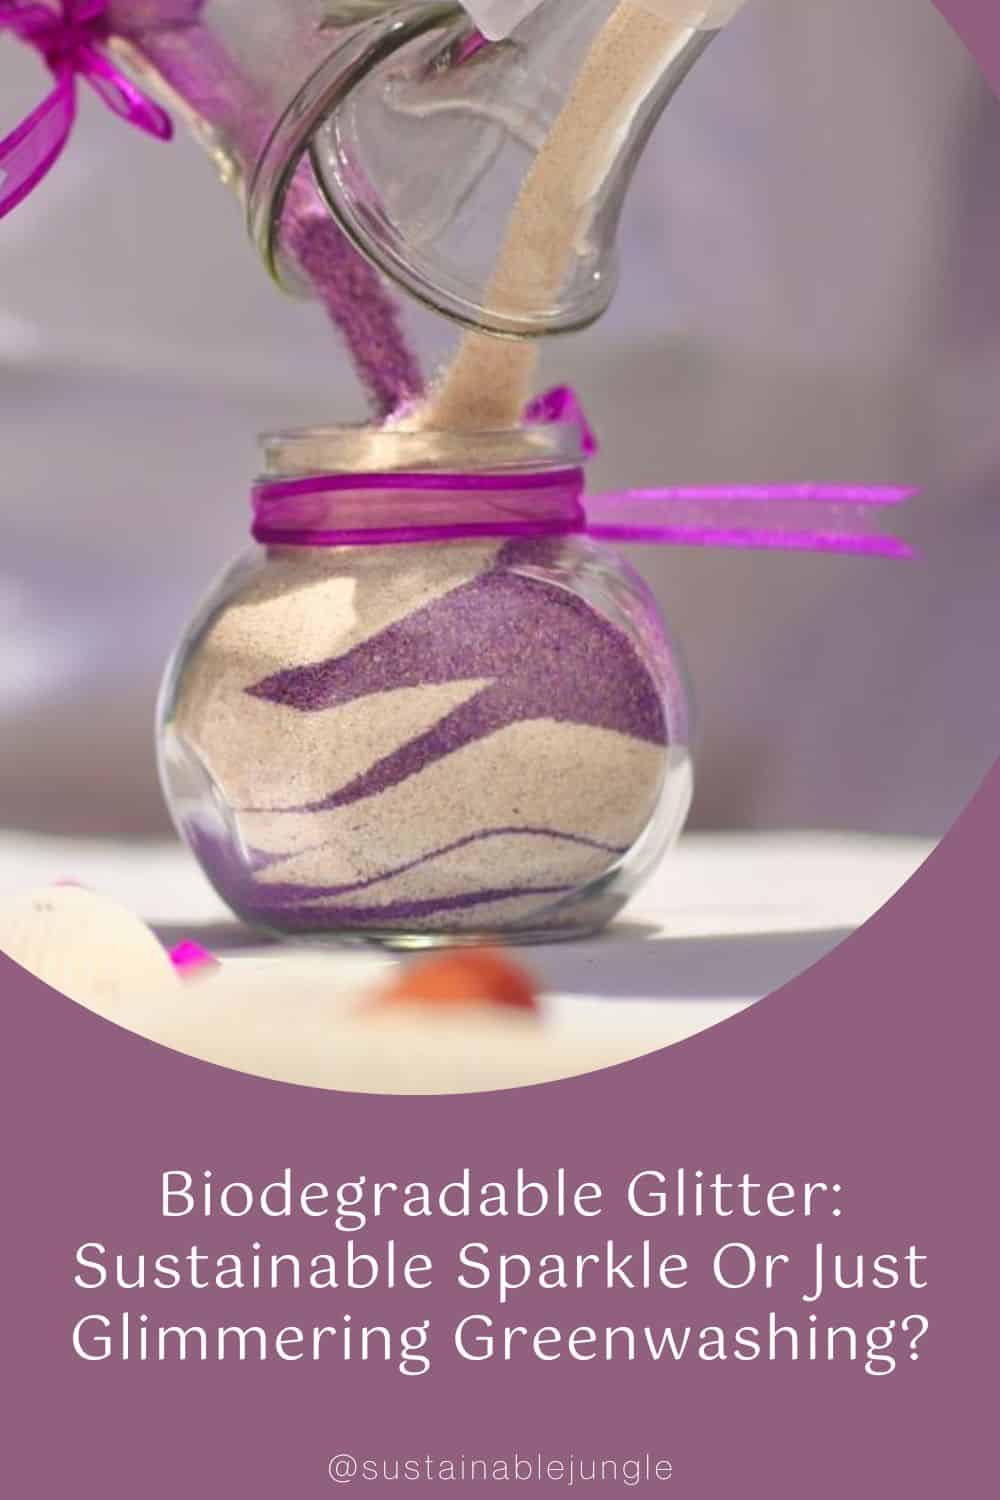 Biodegradable Glitter: Sustainable Sparkle Or Just Glimmering Greenwashing? Image by Artfotogan via Getty Images on Canva Pro #biodegredableglitter #isbiodegradableglitterreallybiodegradable #biodegradablefaceglitter #ecofriendlyglitter #ecofriendlycraftglitter #ecofriendlyglitteralternatives #sustainablejungle